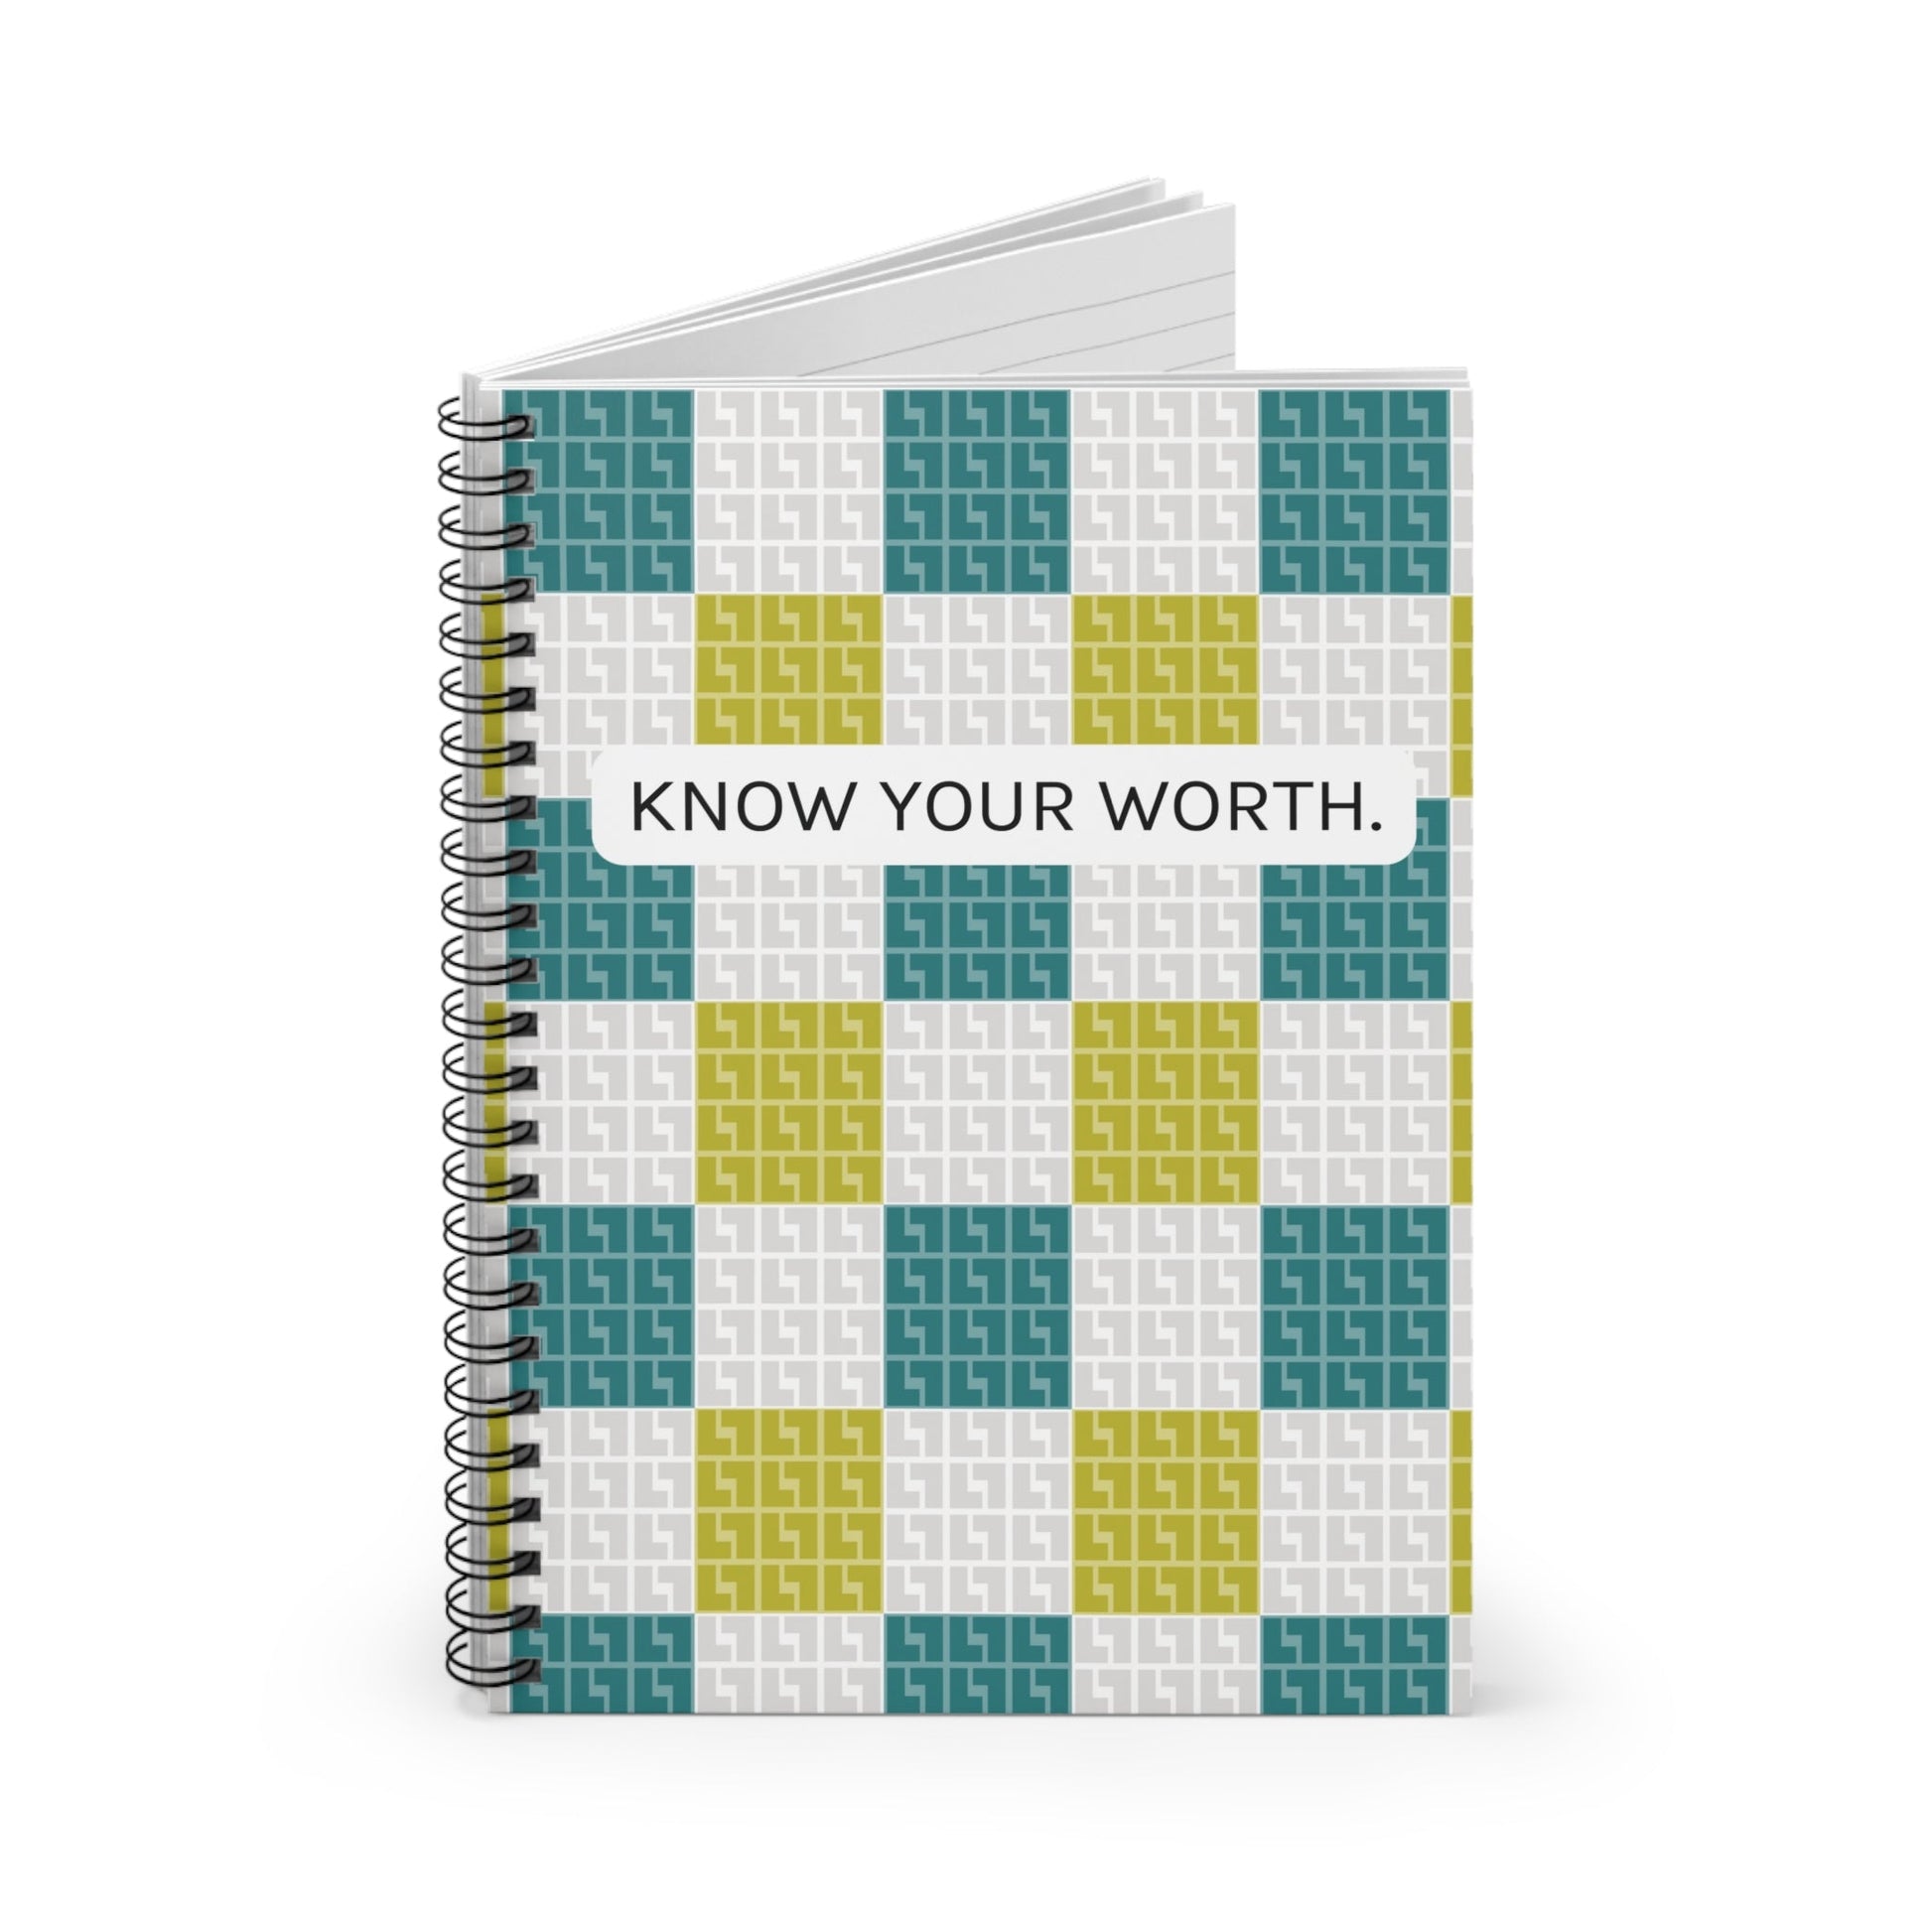 Know Your Worth. Spiral Notebook - Ruled Line - LOUD